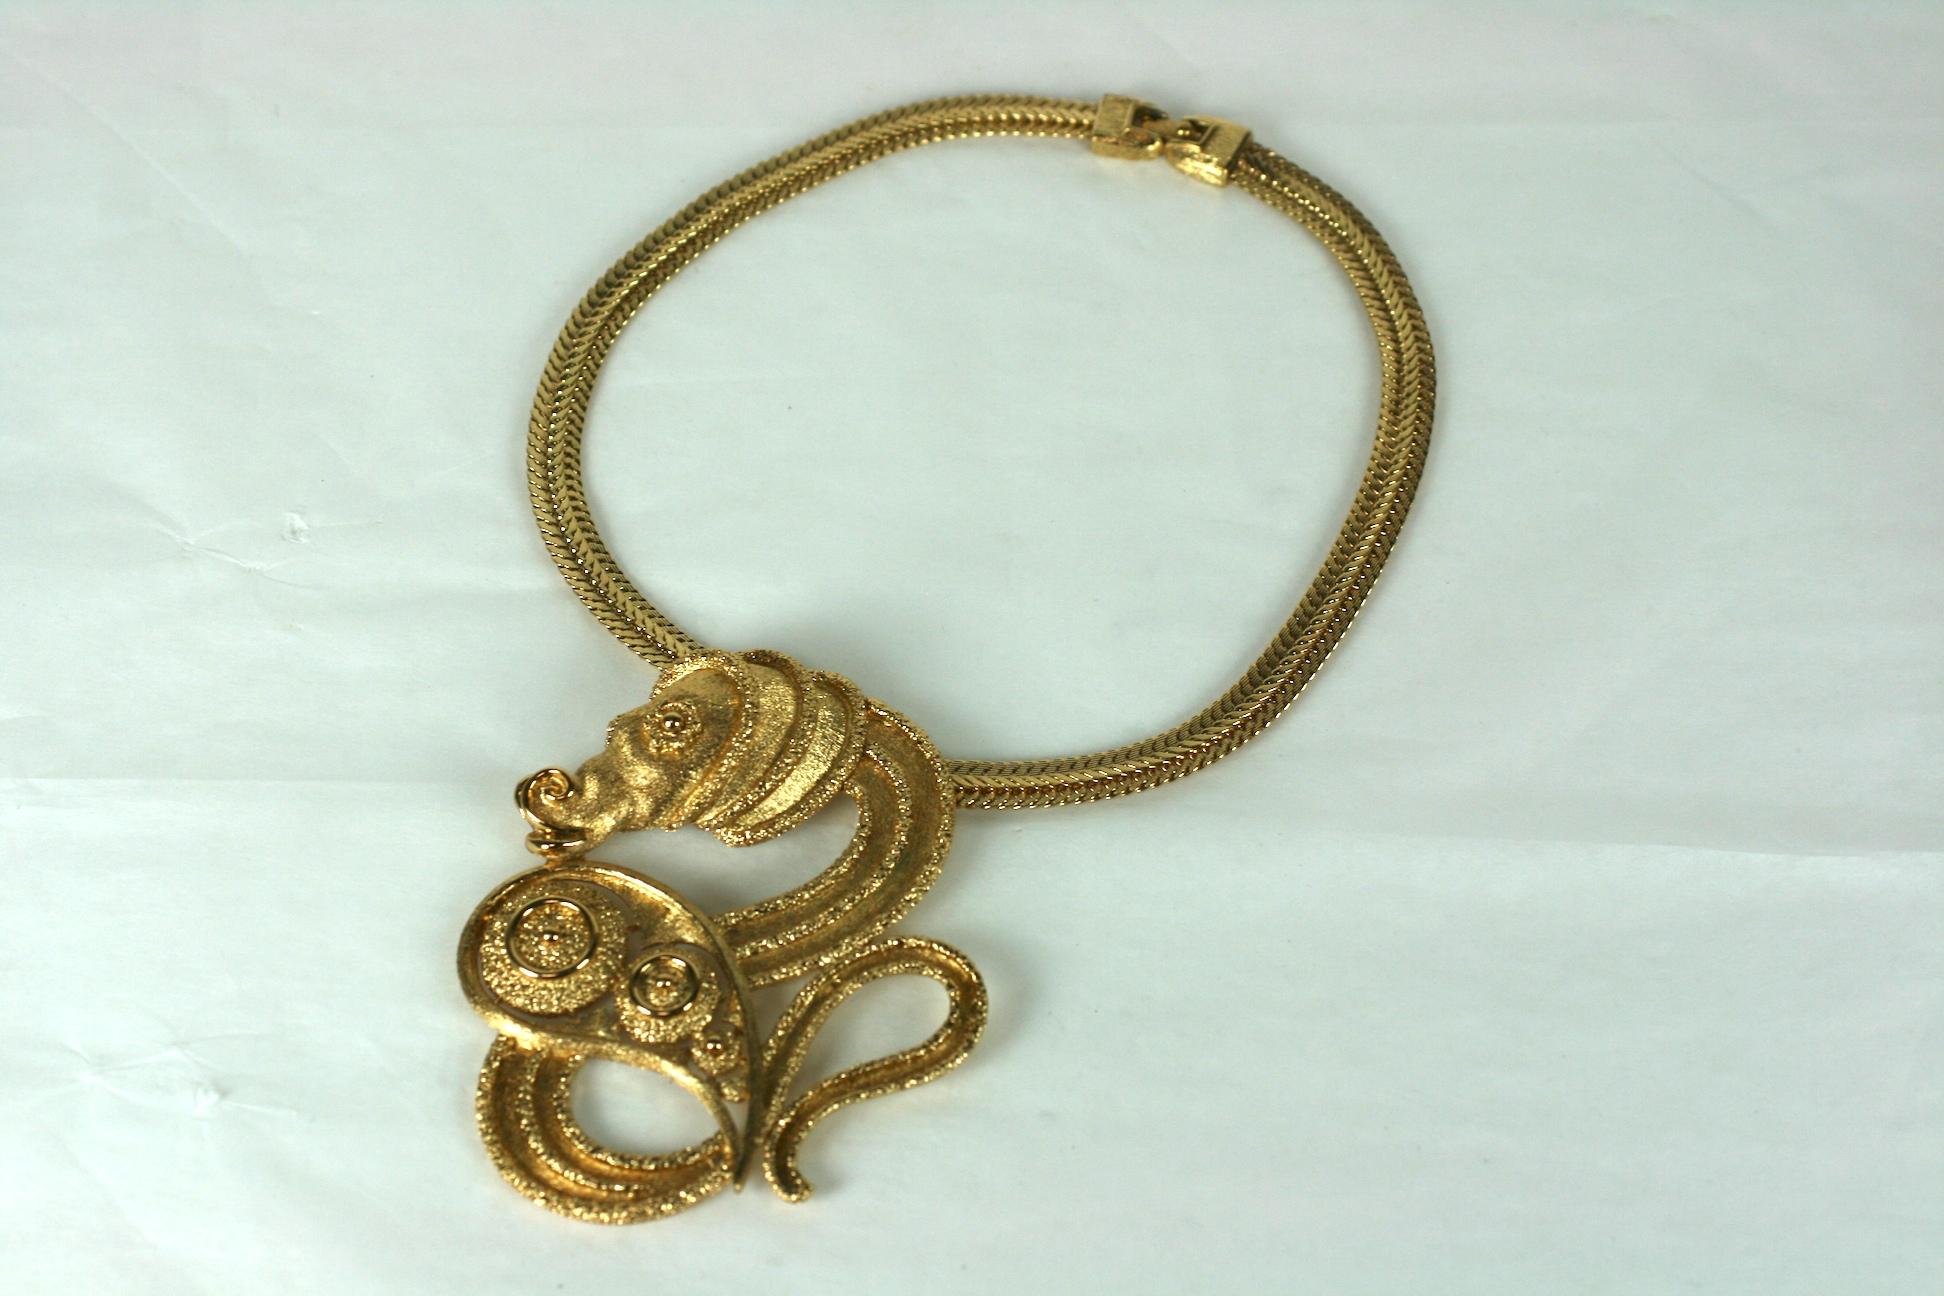 Amazing Monet Mythical Gold Seahorse Pendant Necklace on gilt herringbone chain. Large pendant in brushed  and textured gold measures 4